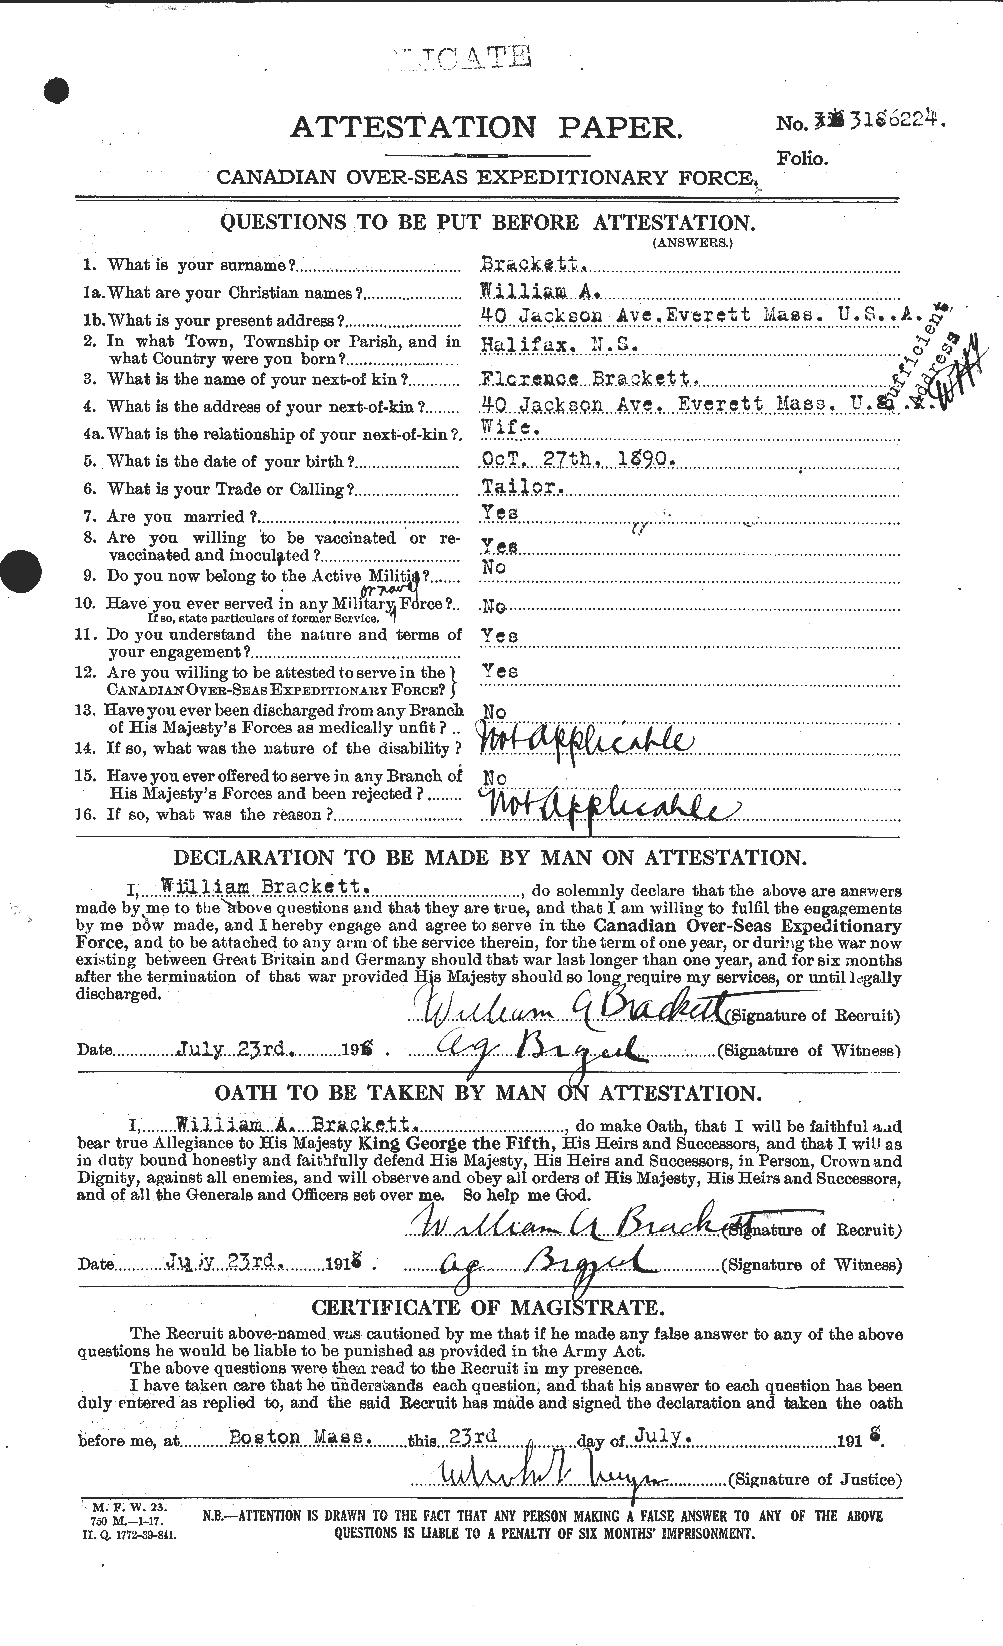 Personnel Records of the First World War - CEF 254743a